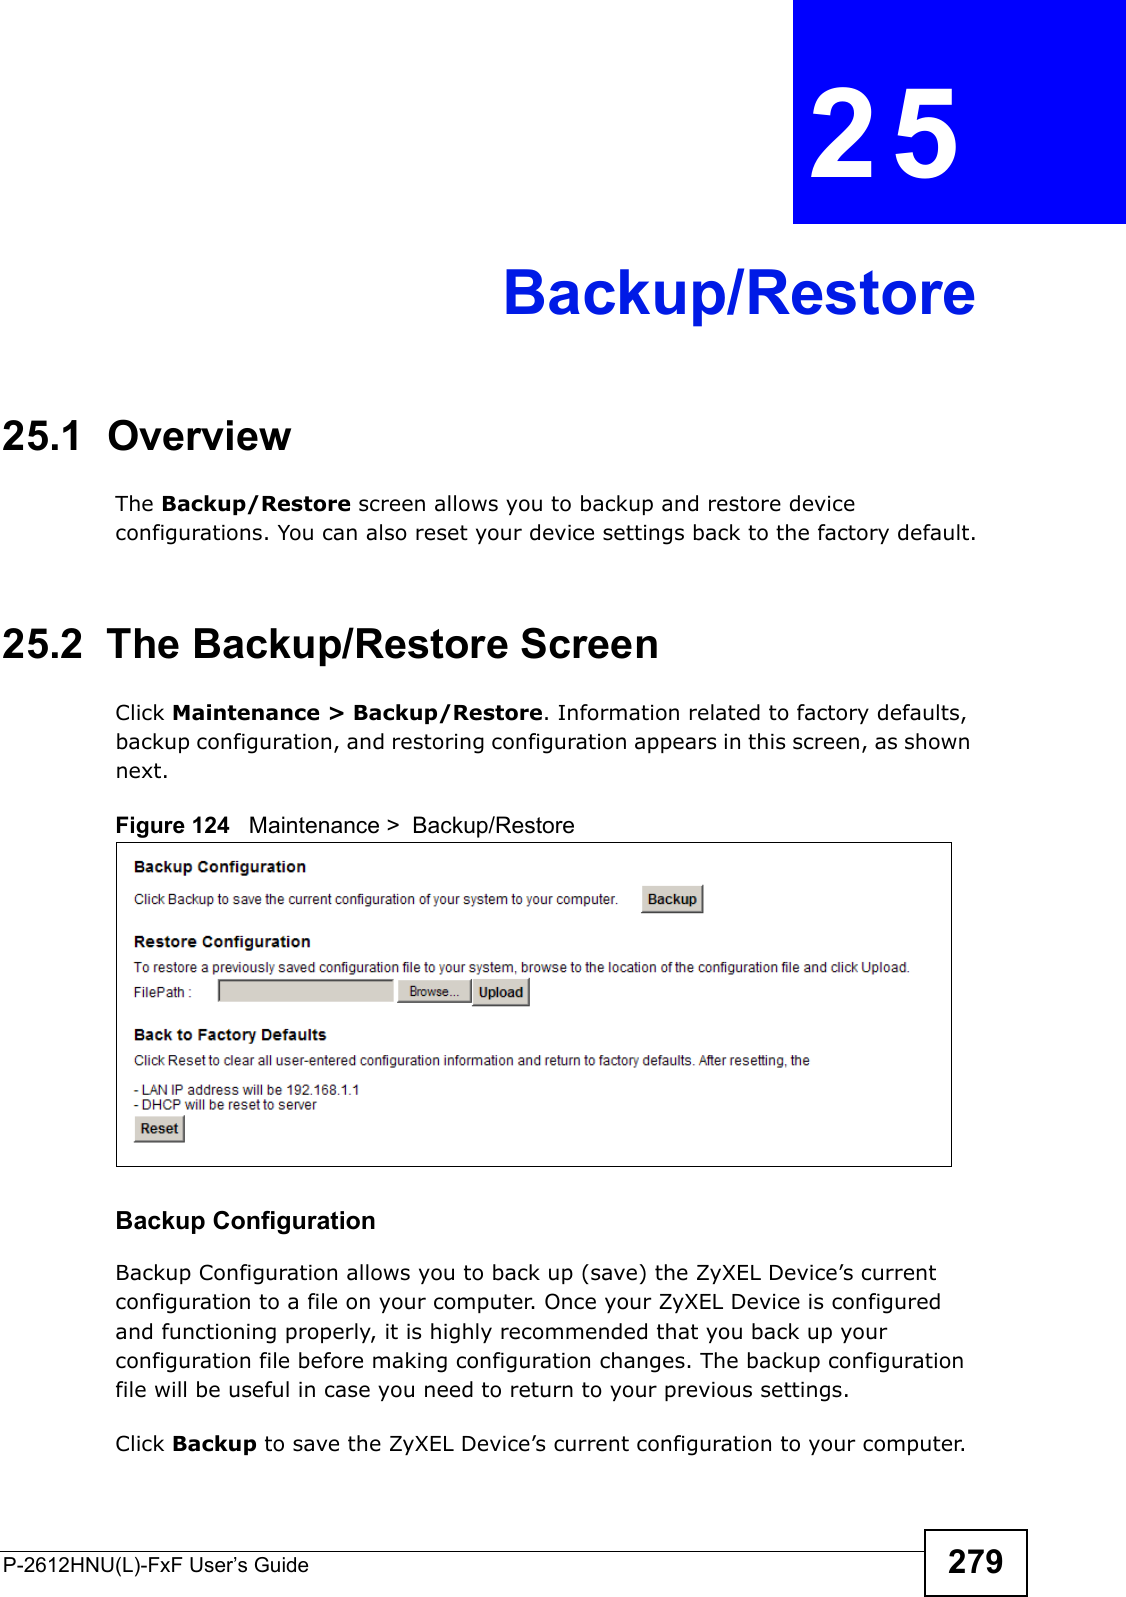 P-2612HNU(L)-FxF User’s Guide 279CHAPTER   25 Backup/Restore25.1  OverviewThe Backup/Restore screen allows you to backup and restore device configurations. You can also reset your device settings back to the factory default.25.2  The Backup/Restore Screen Click Maintenance &gt; Backup/Restore. Information related to factory defaults, backup configuration, and restoring configuration appears in this screen, as shown next.Figure 124   Maintenance &gt;  Backup/RestoreBackup Configuration Backup Configuration allows you to back up (save) the ZyXEL Device’s current configuration to a file on your computer. Once your ZyXEL Device is configuredand functioning properly, it is highly recommended that you back up your configuration file before making configuration changes. The backup configuration file will be useful in case you need to return to your previous settings.Click Backup to save the ZyXEL Device’s current configuration to your computer.